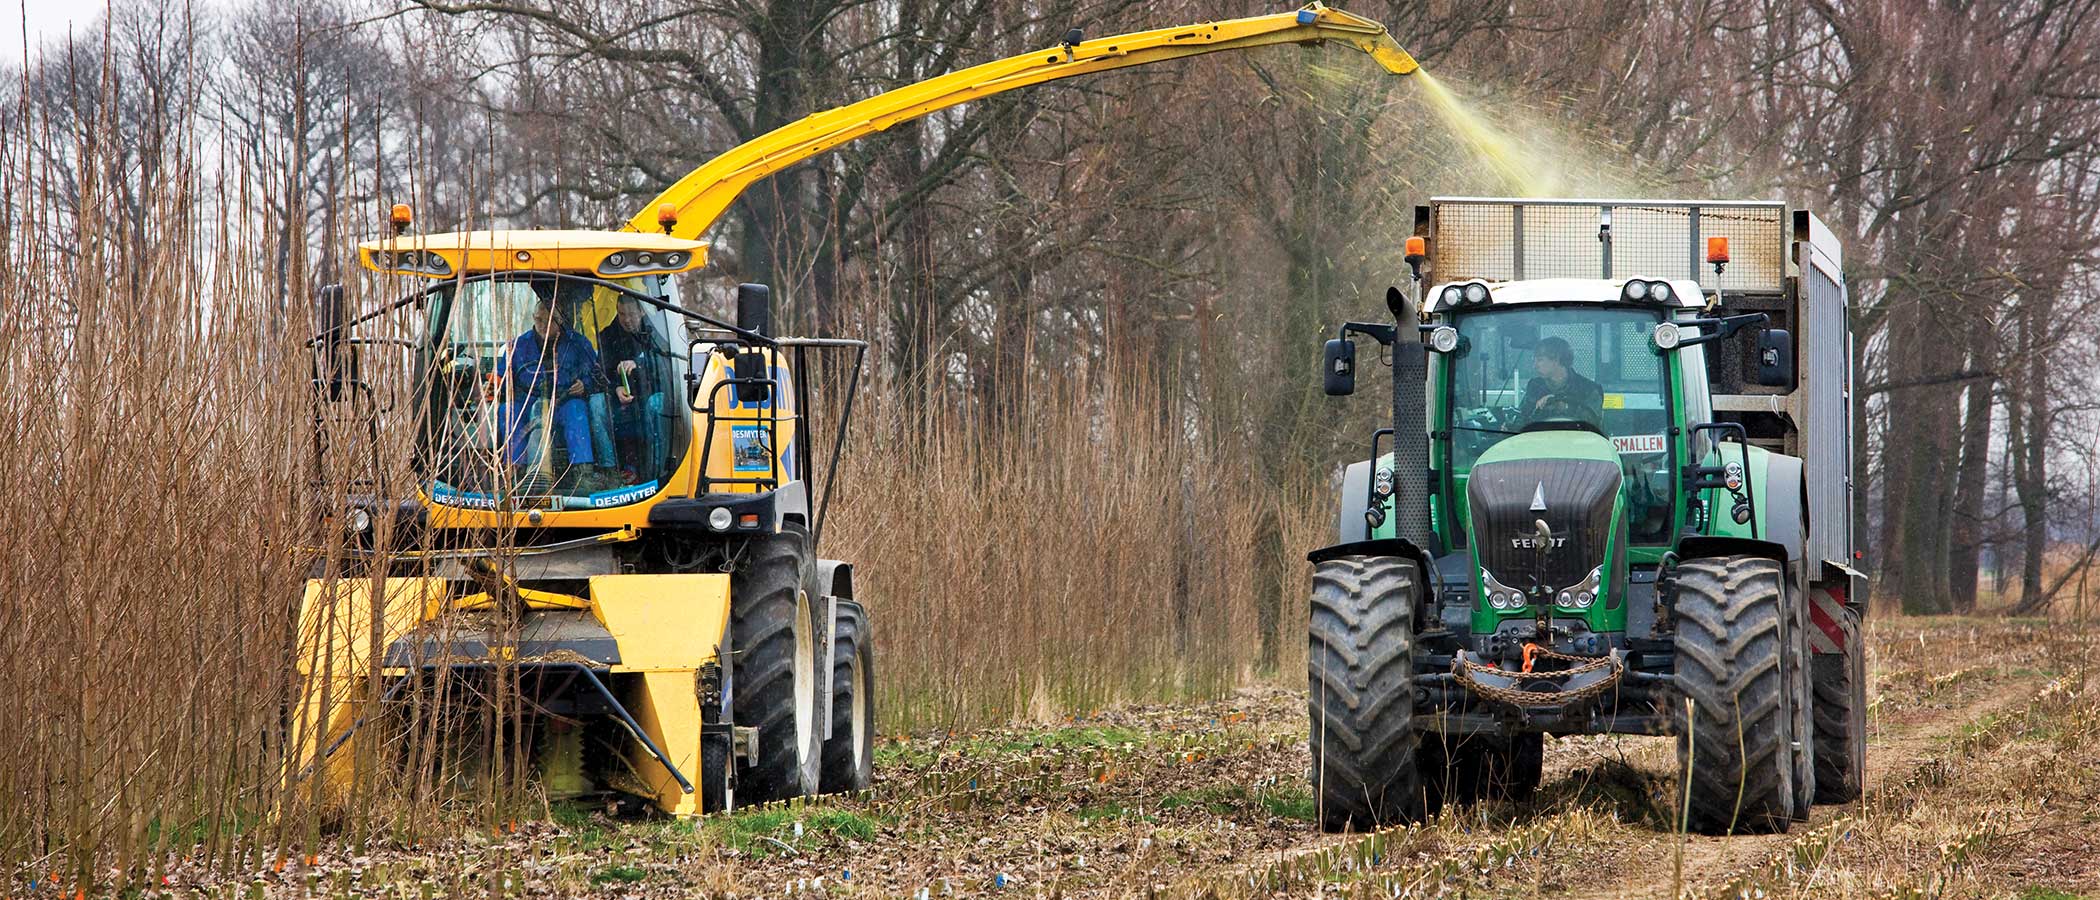 Tractpr harvesting biomass in Germany.